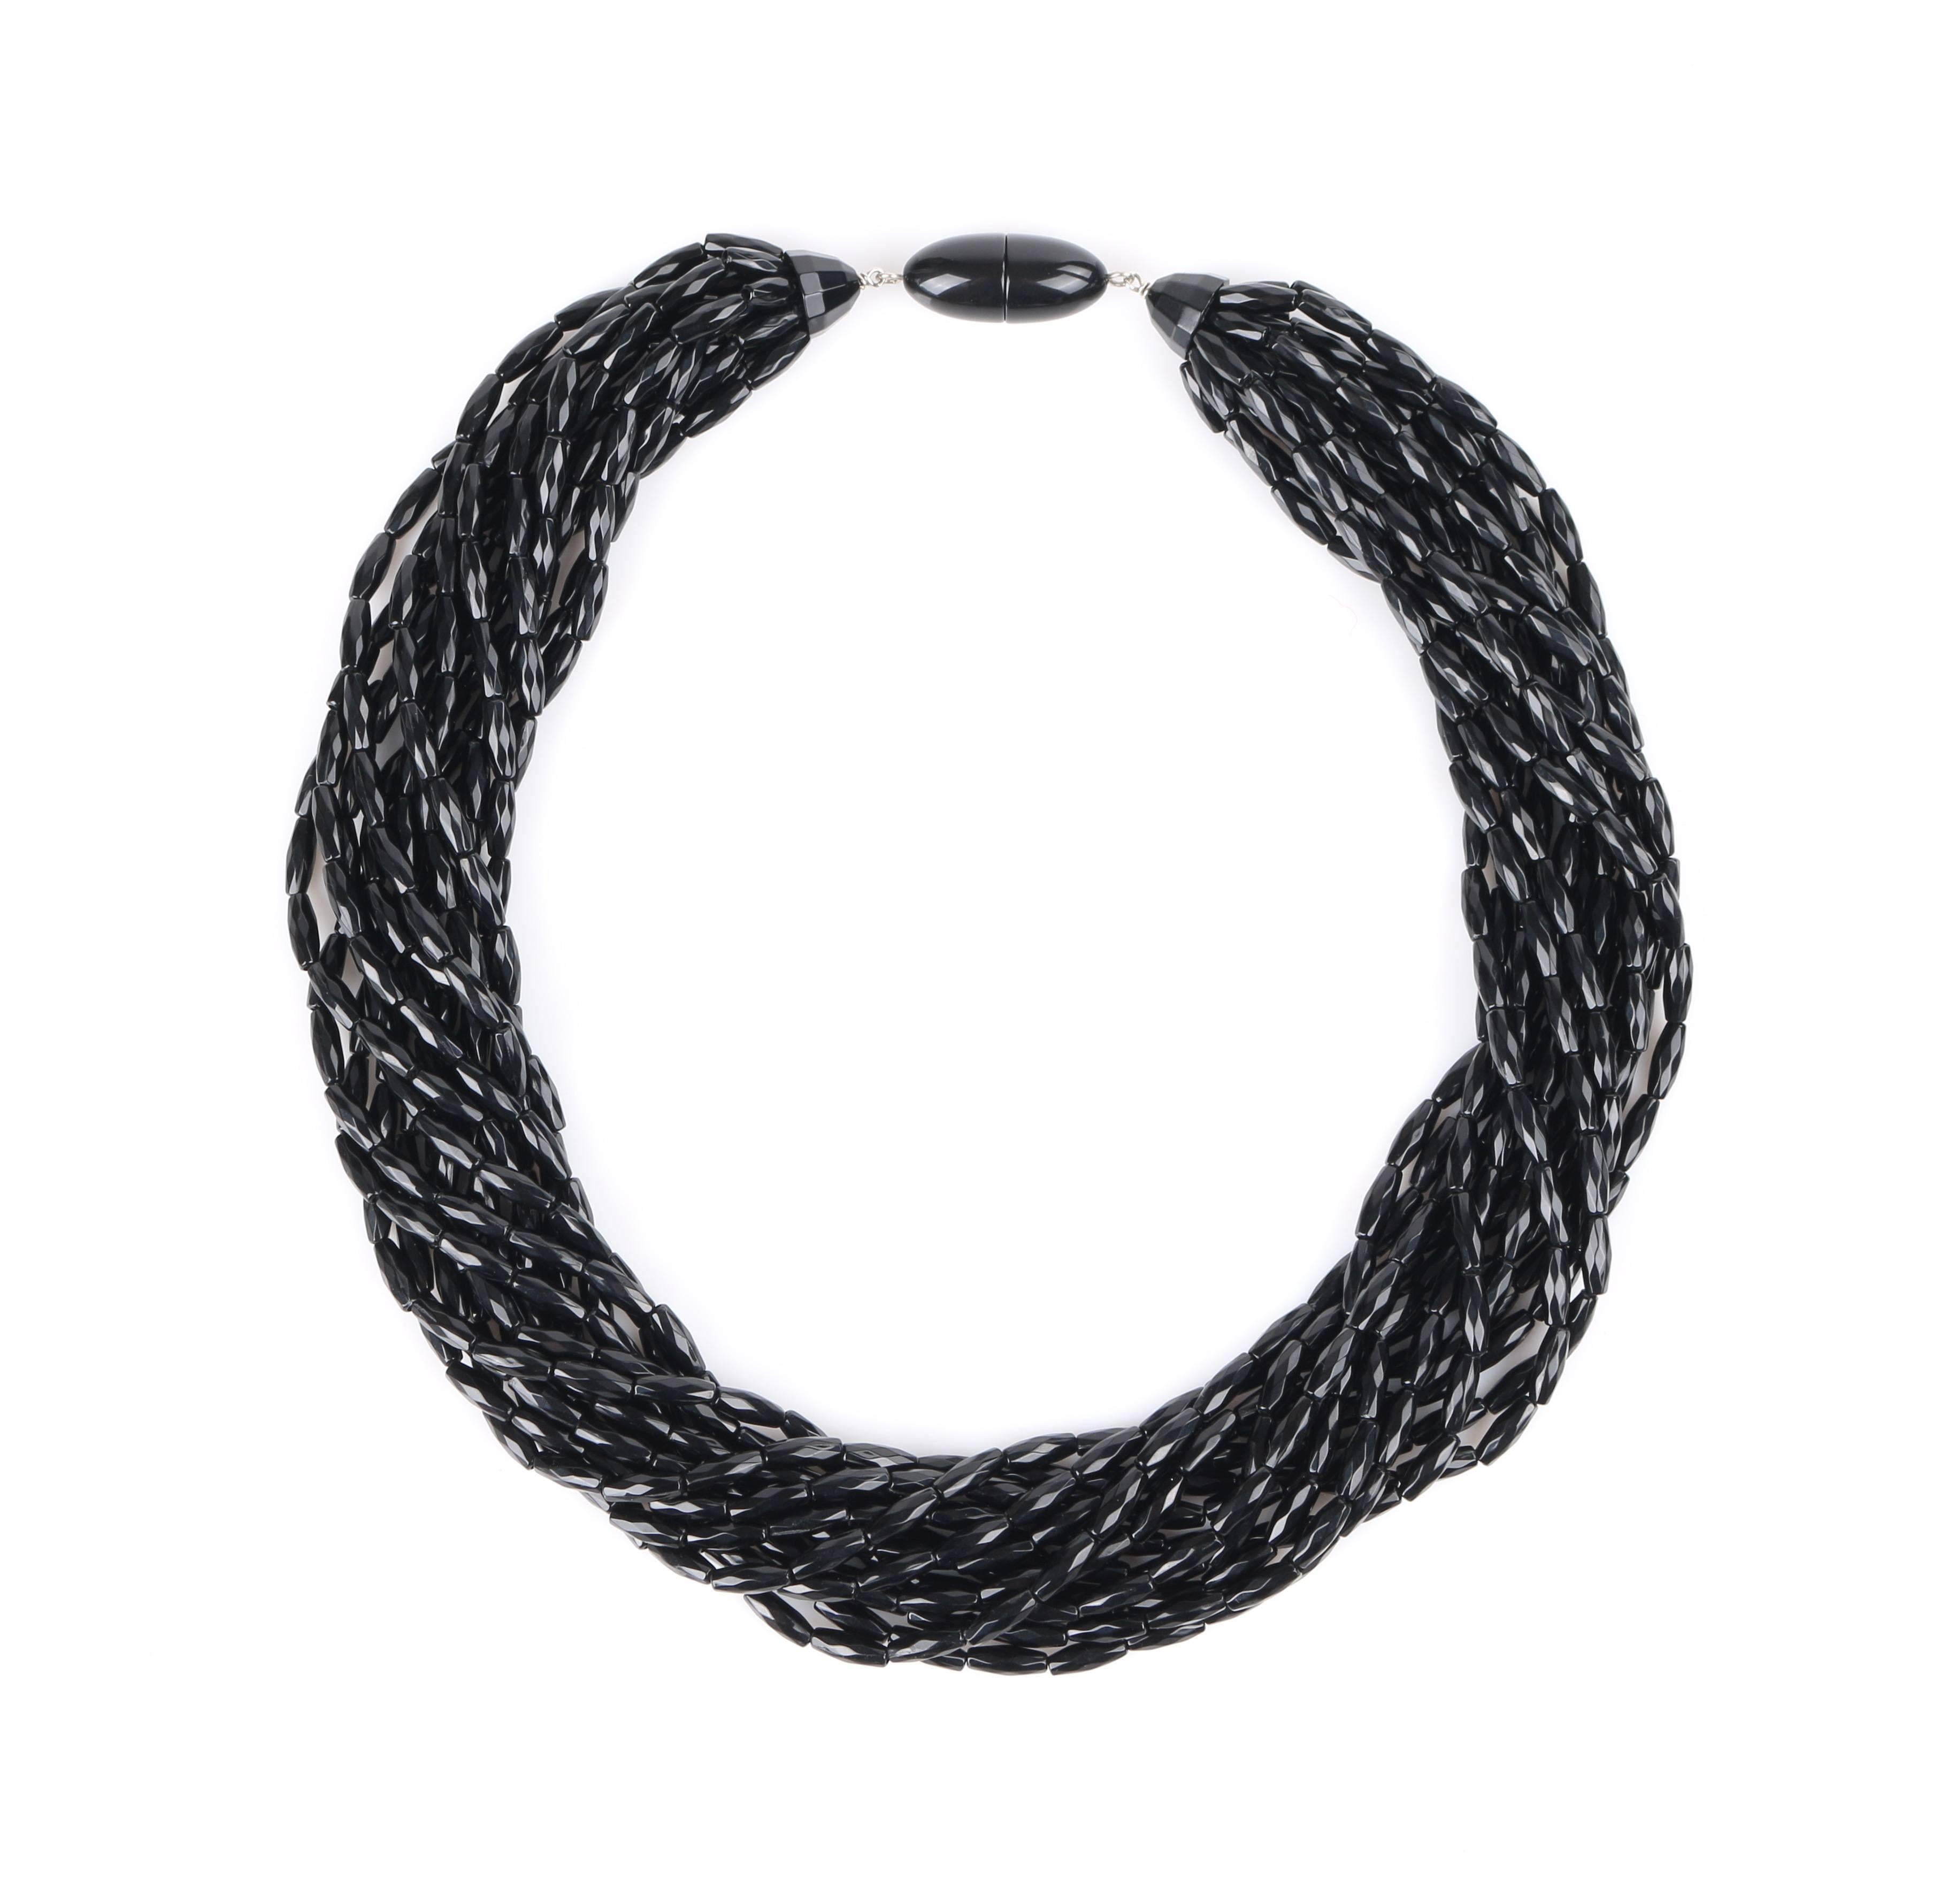 Angela Caputi black multi-strand knotted choker necklace. Thirteen strands made up of black faceted bi-cone resin beads. Each strand is attached to a black faceted semi-sphere with knotted detail at center. Necklace fastens with an oblong snap